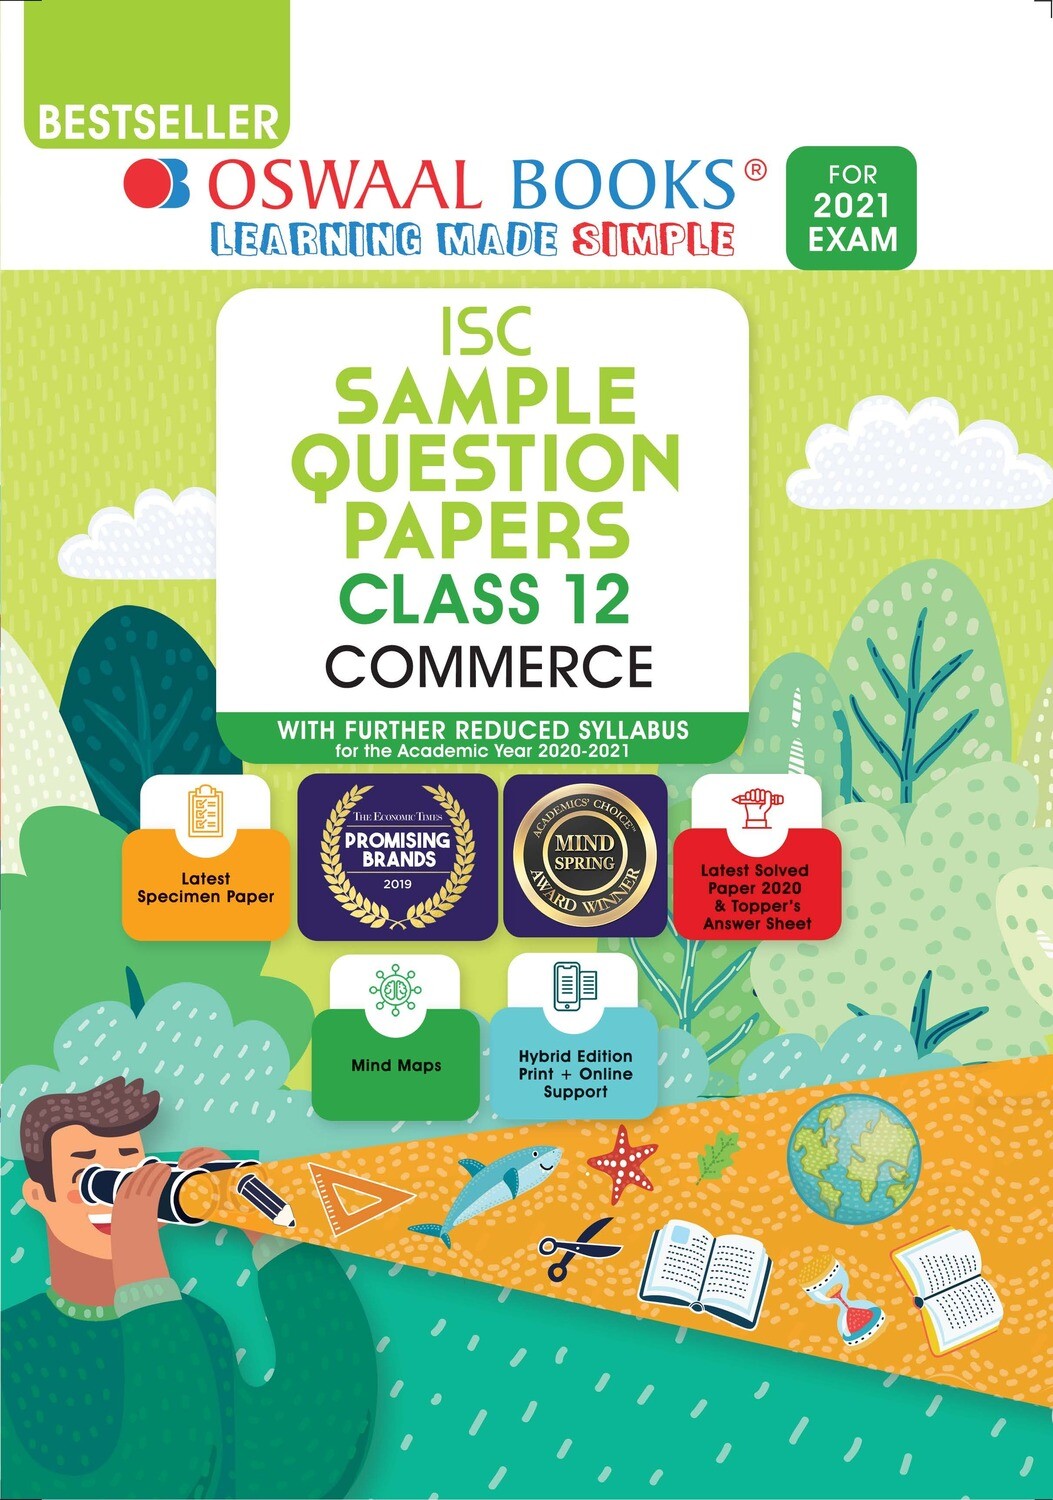 Buy e-book: Oswaal ISC Sample Question Papers Class 12 Commerce (For 2021 Exam): 9789354230837